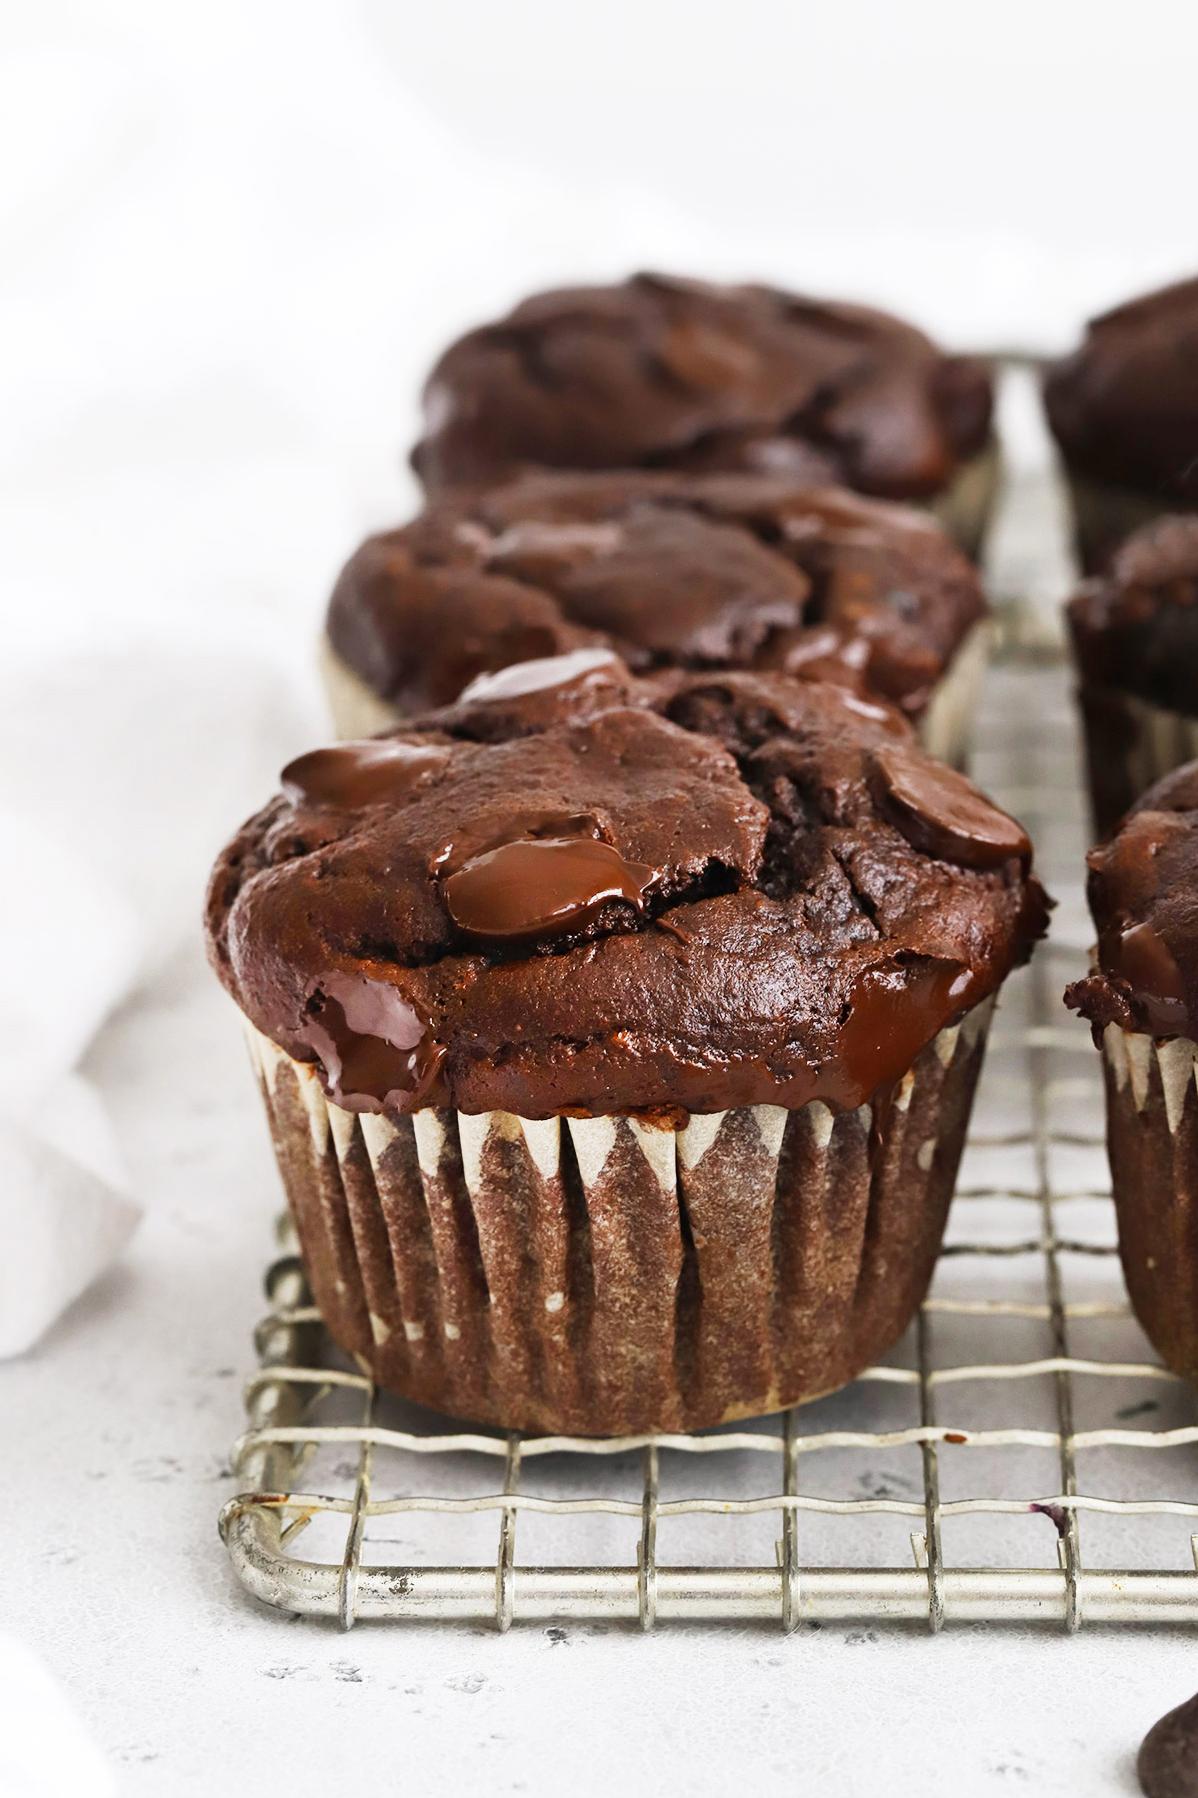  The perfect breakfast treat or mid-day snack, you won't be able to resist these muffins.